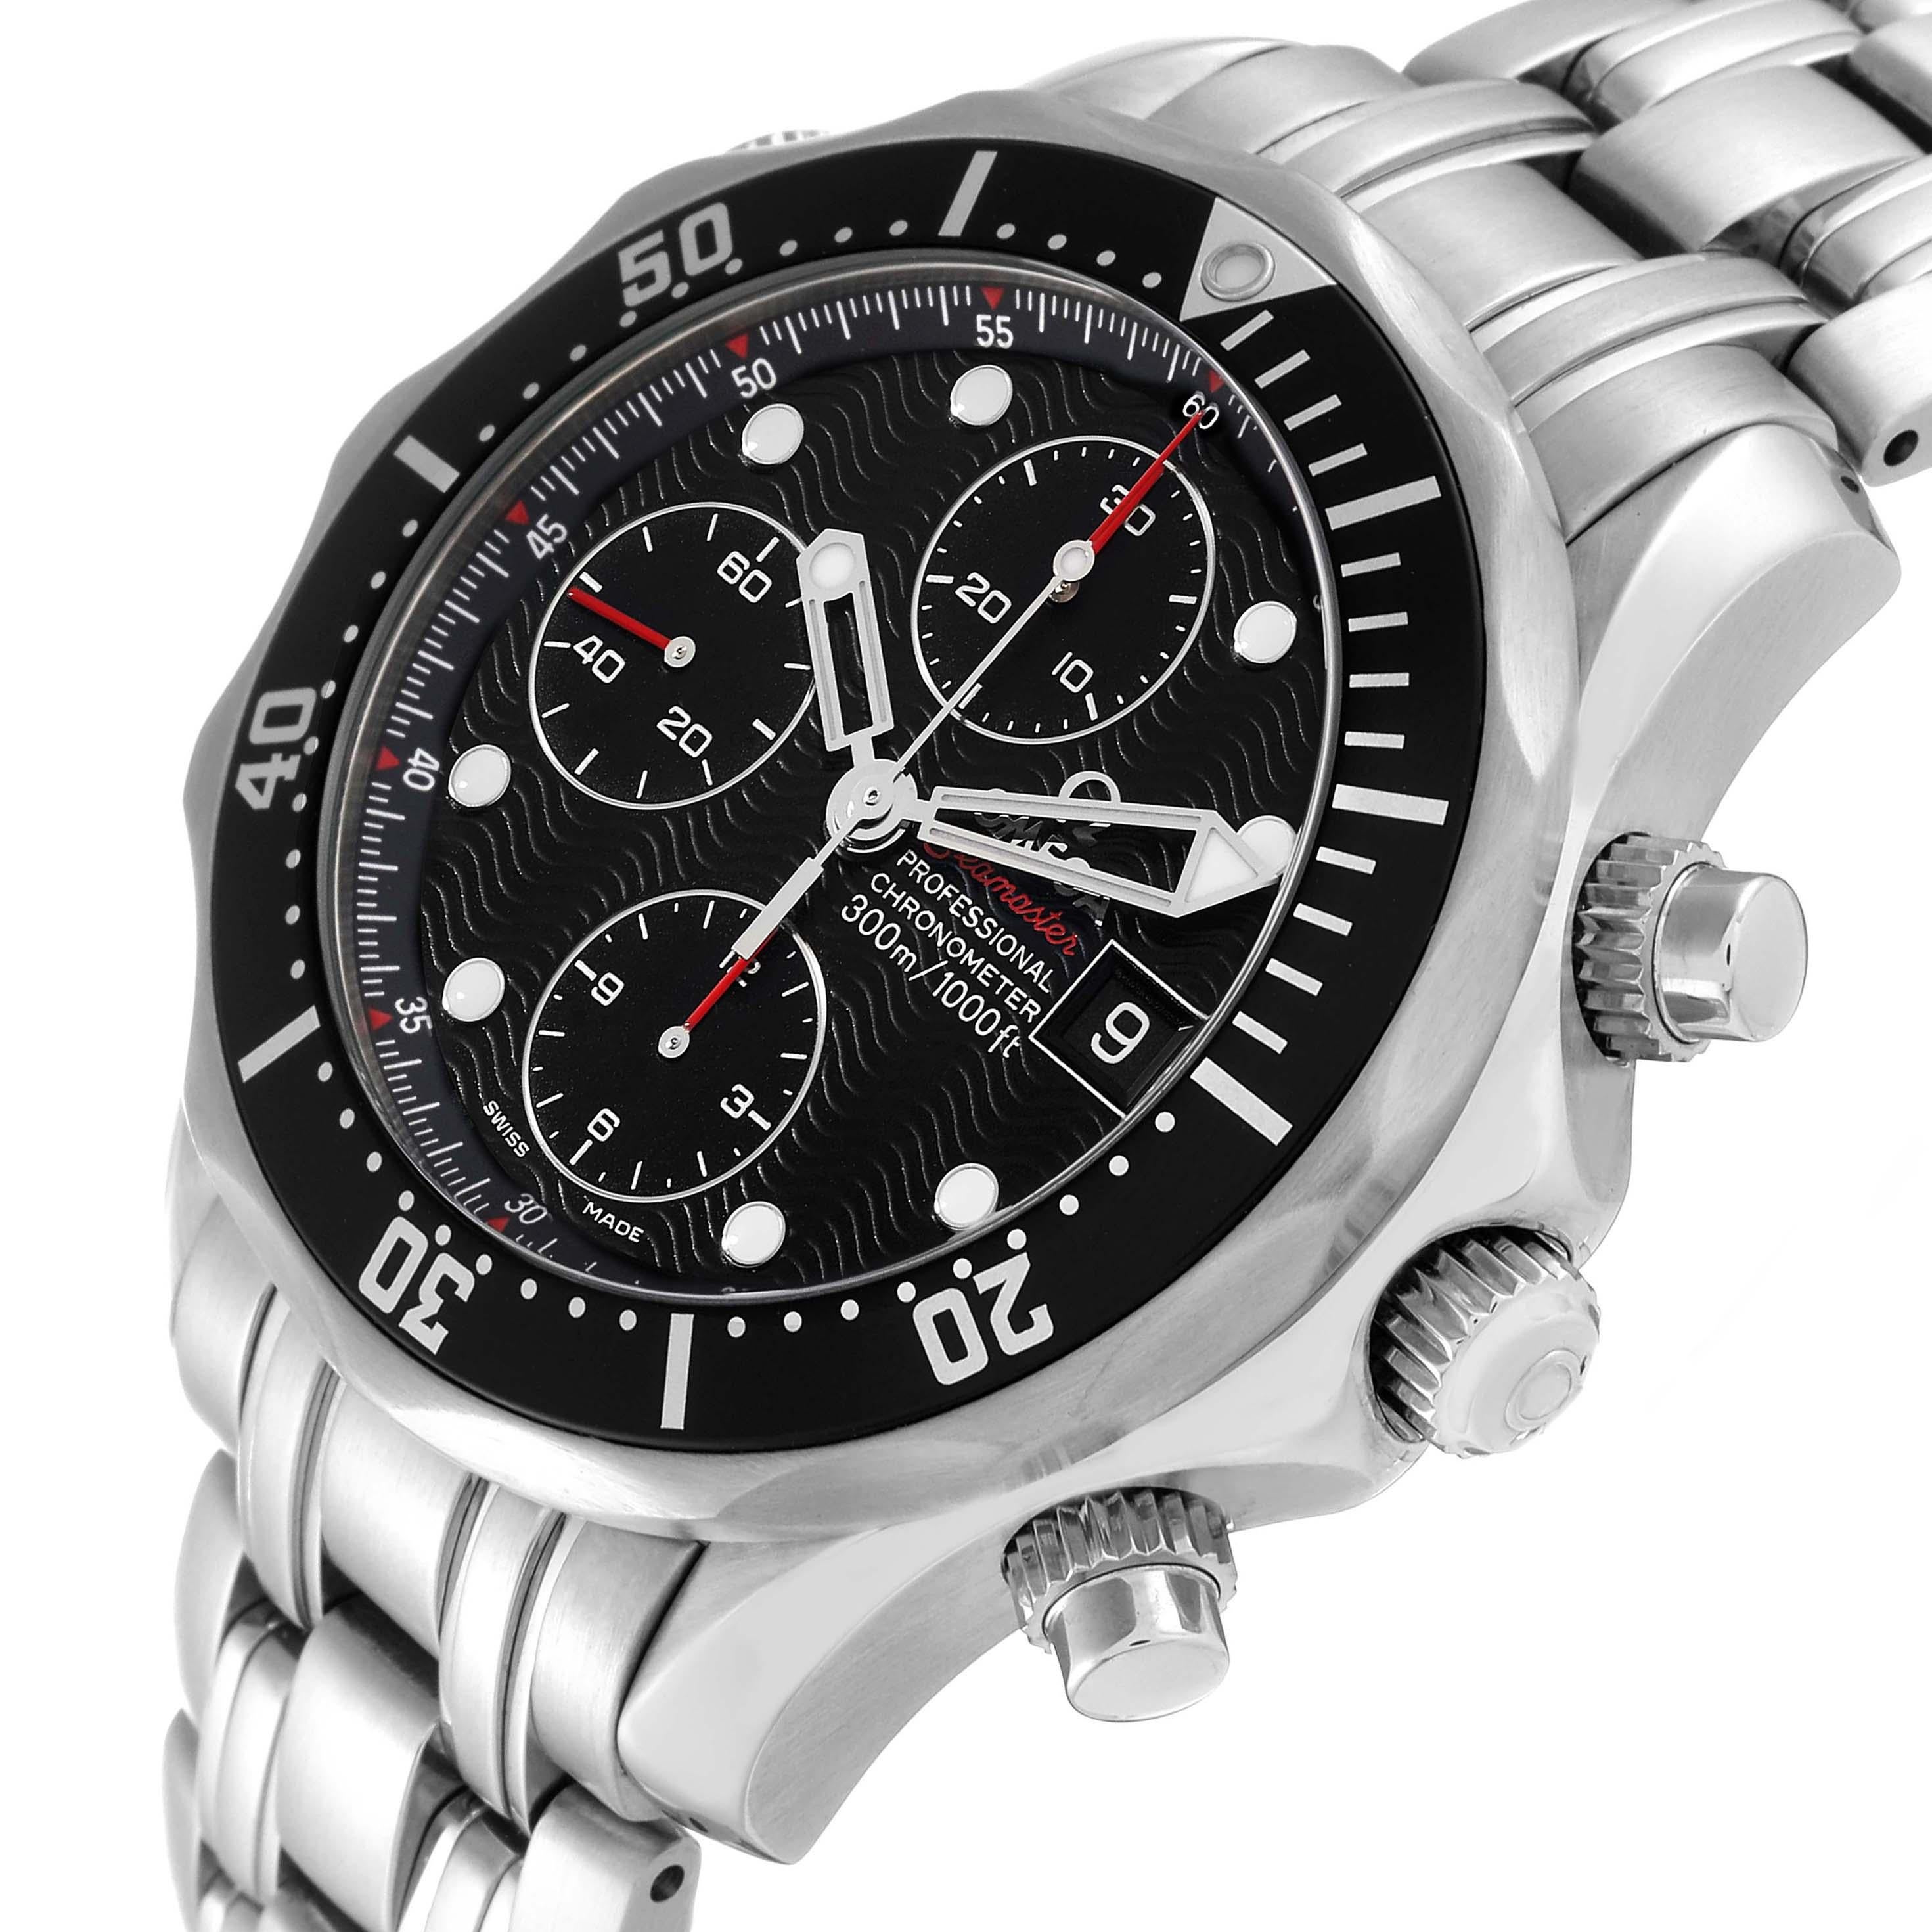 Omega Seamaster Chronograph Black Dial Steel Mens Watch 213.30.42.40.01.001 For Sale 1